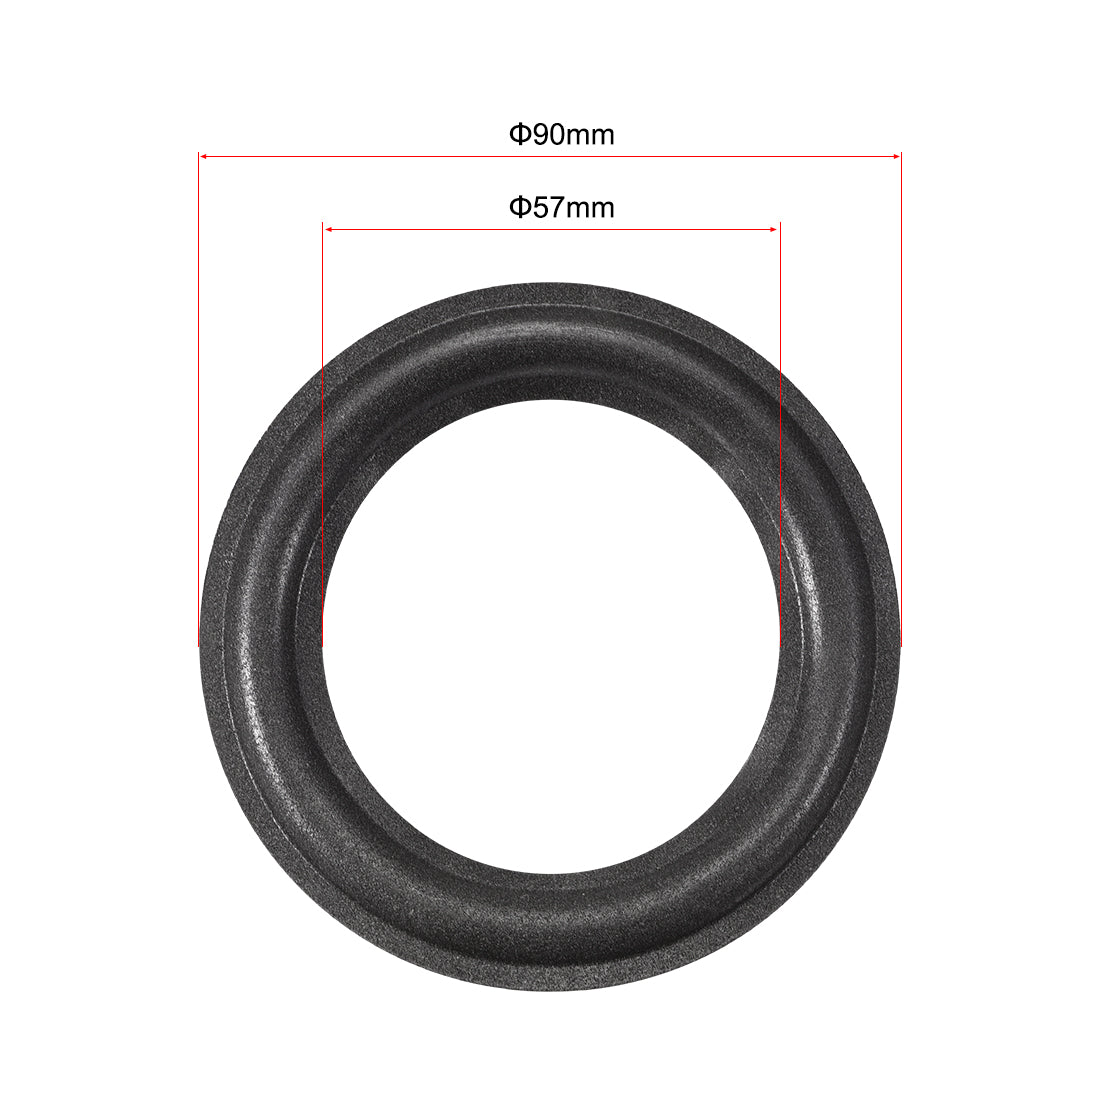 uxcell Uxcell 3.5" 3.5 inches Speaker Foam Edge Surround Rings Replacement Parts for Speaker Repair or DIY